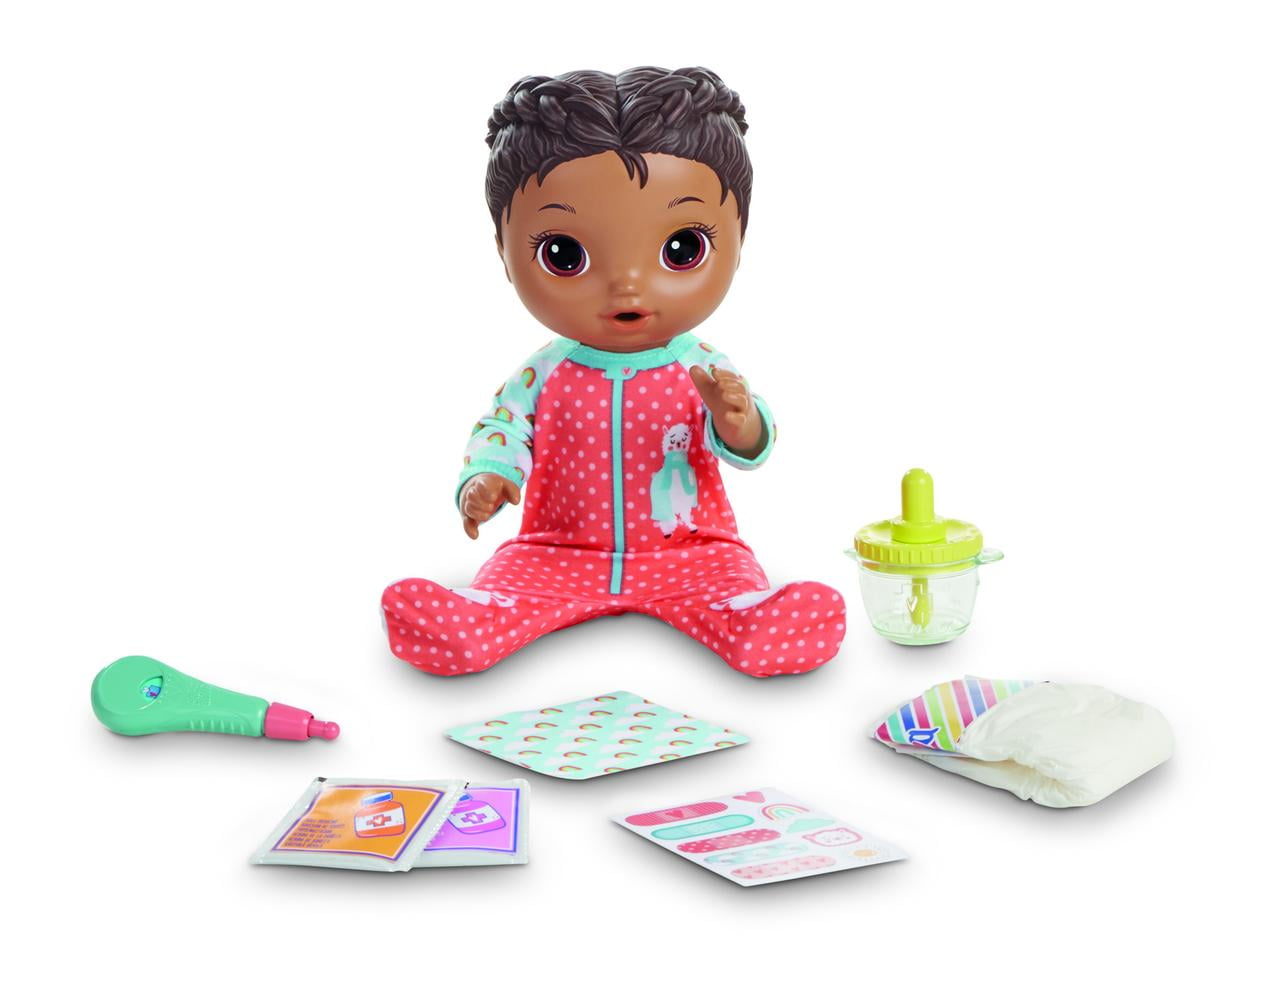 Baby Alive Mix My Medicine Doll, Polka Dot Pajamas, Doctor Accessories